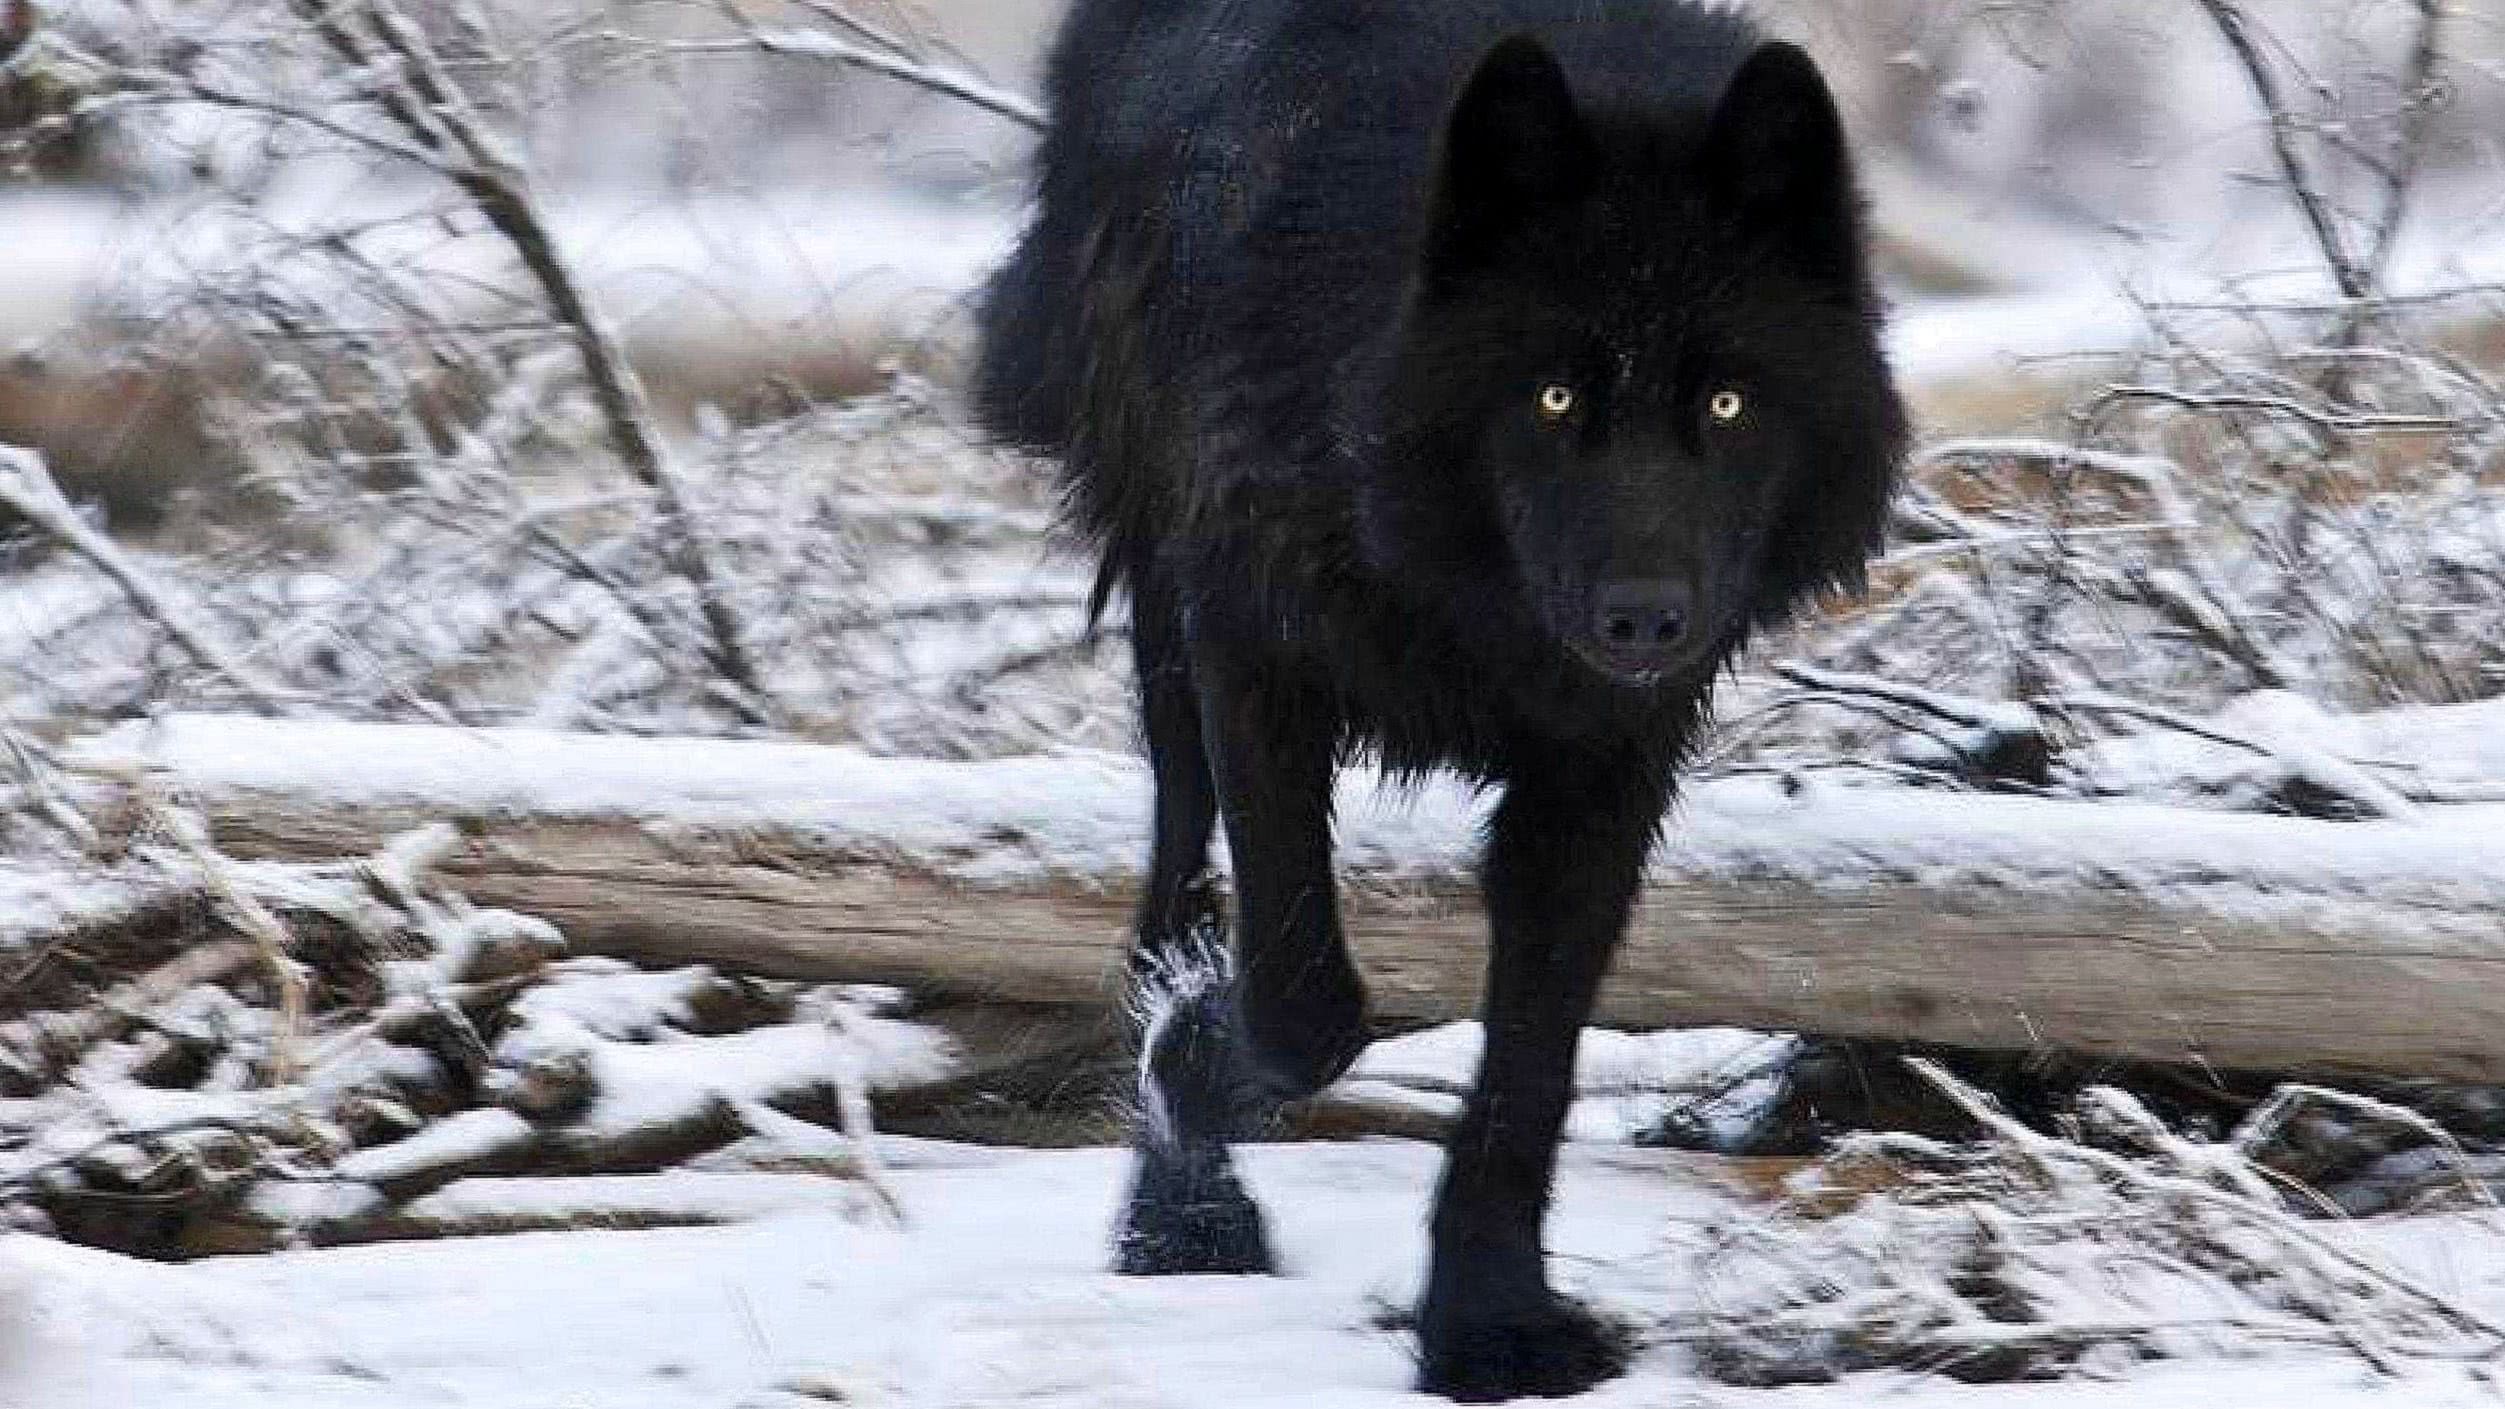 HD Wallpapers Of Black Wolf